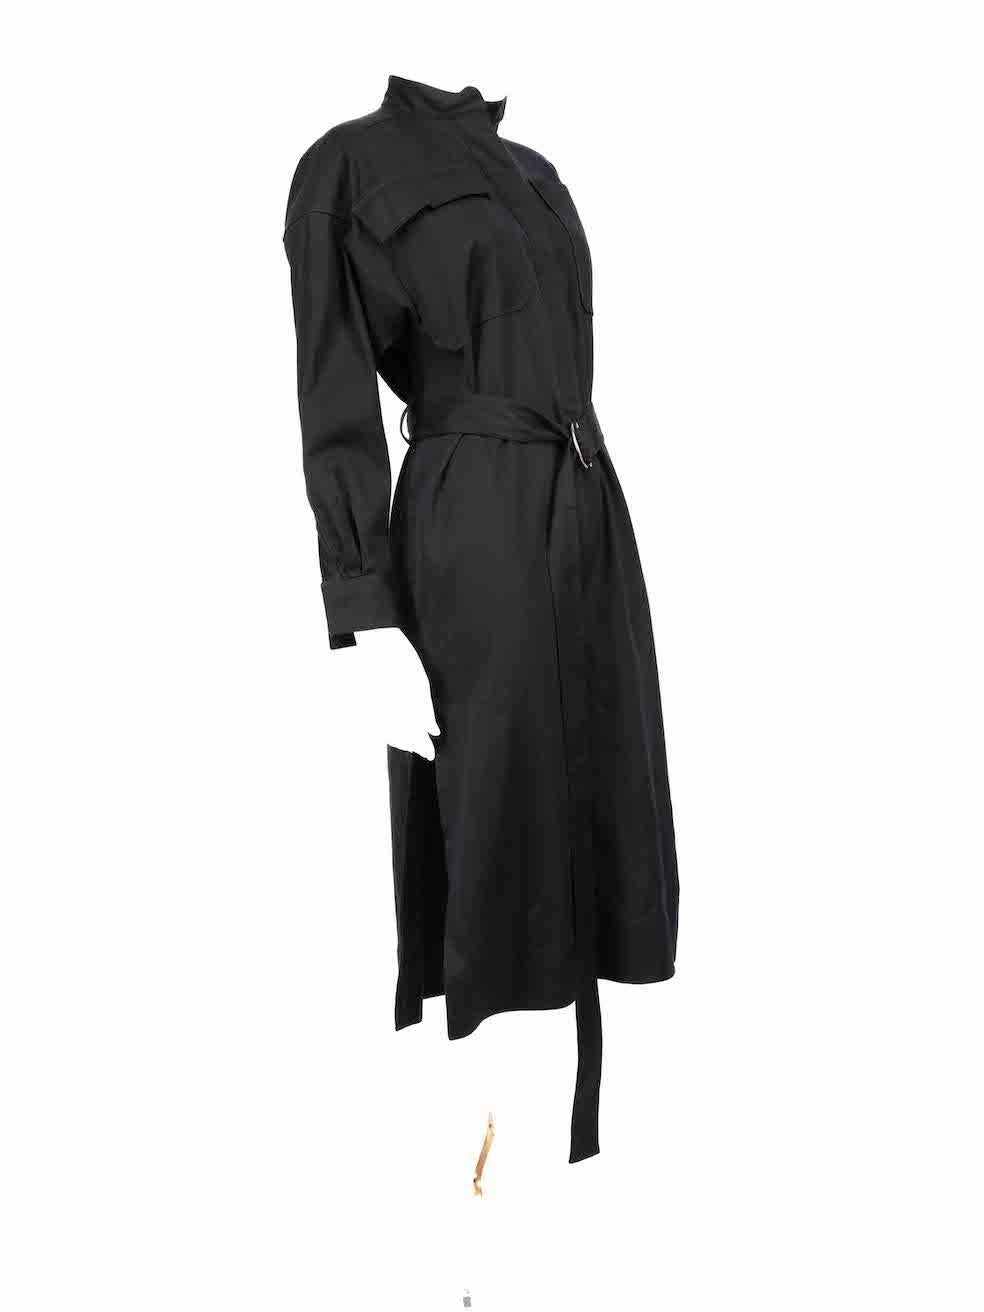 CONDITION is Very good. Minimal wear to dress is evident. Minimal discolouration to the back and front bottom area on this used Céline designer resale item.
 
 
 
 Details
 
 
 Black
 
 Cotton
 
 Shirt dress
 
 Long sleeves
 
 Buttoned cuffs
 
